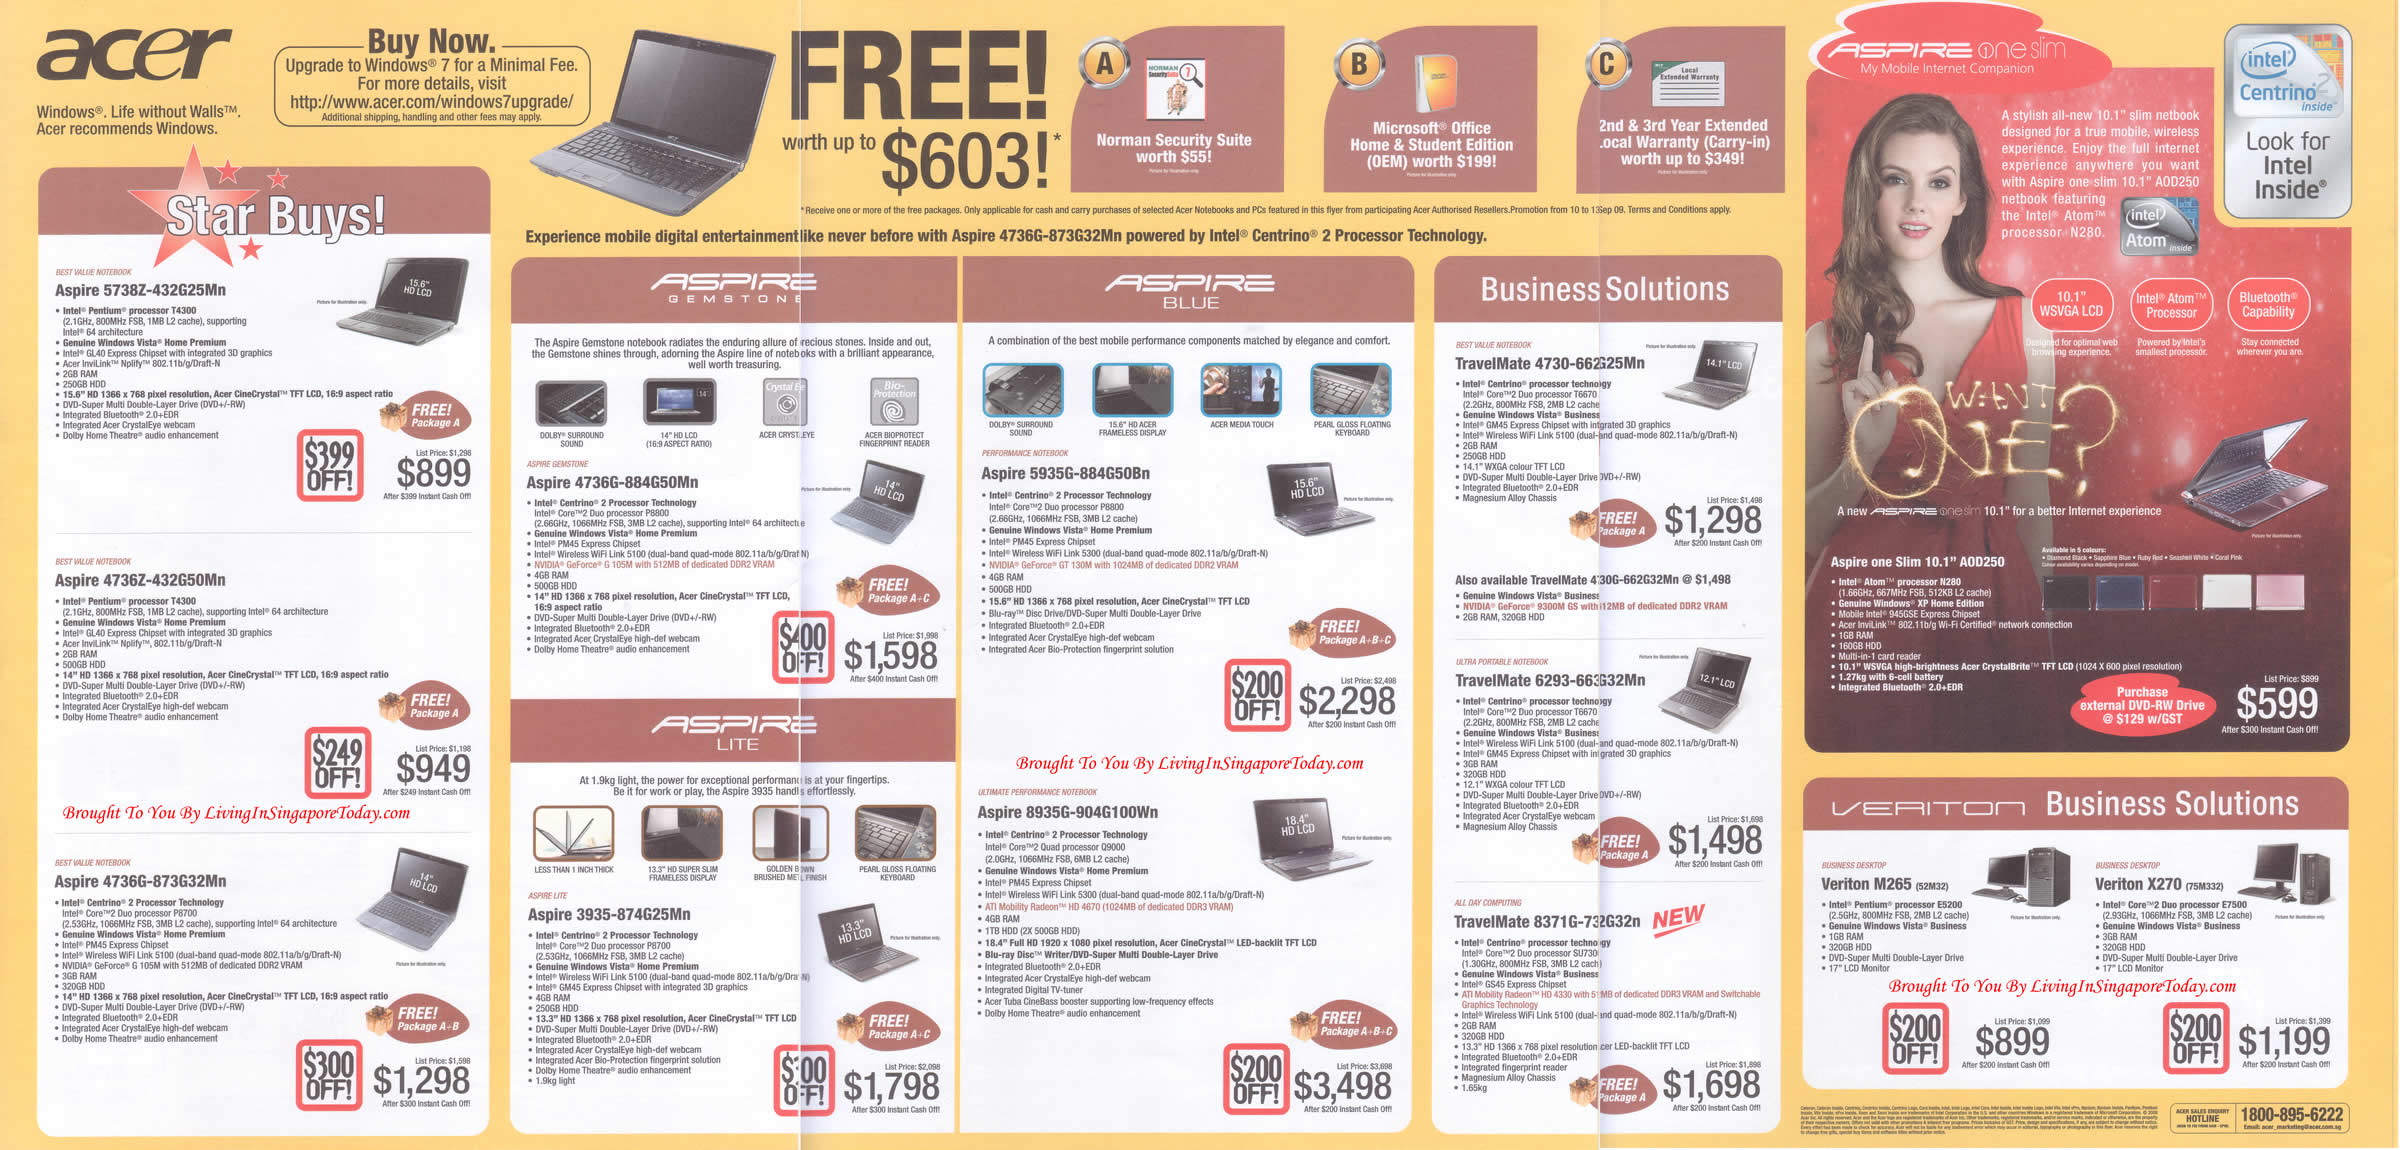 COMEX 2009 – Complete Acer Brochure :: Living In Singapore Today